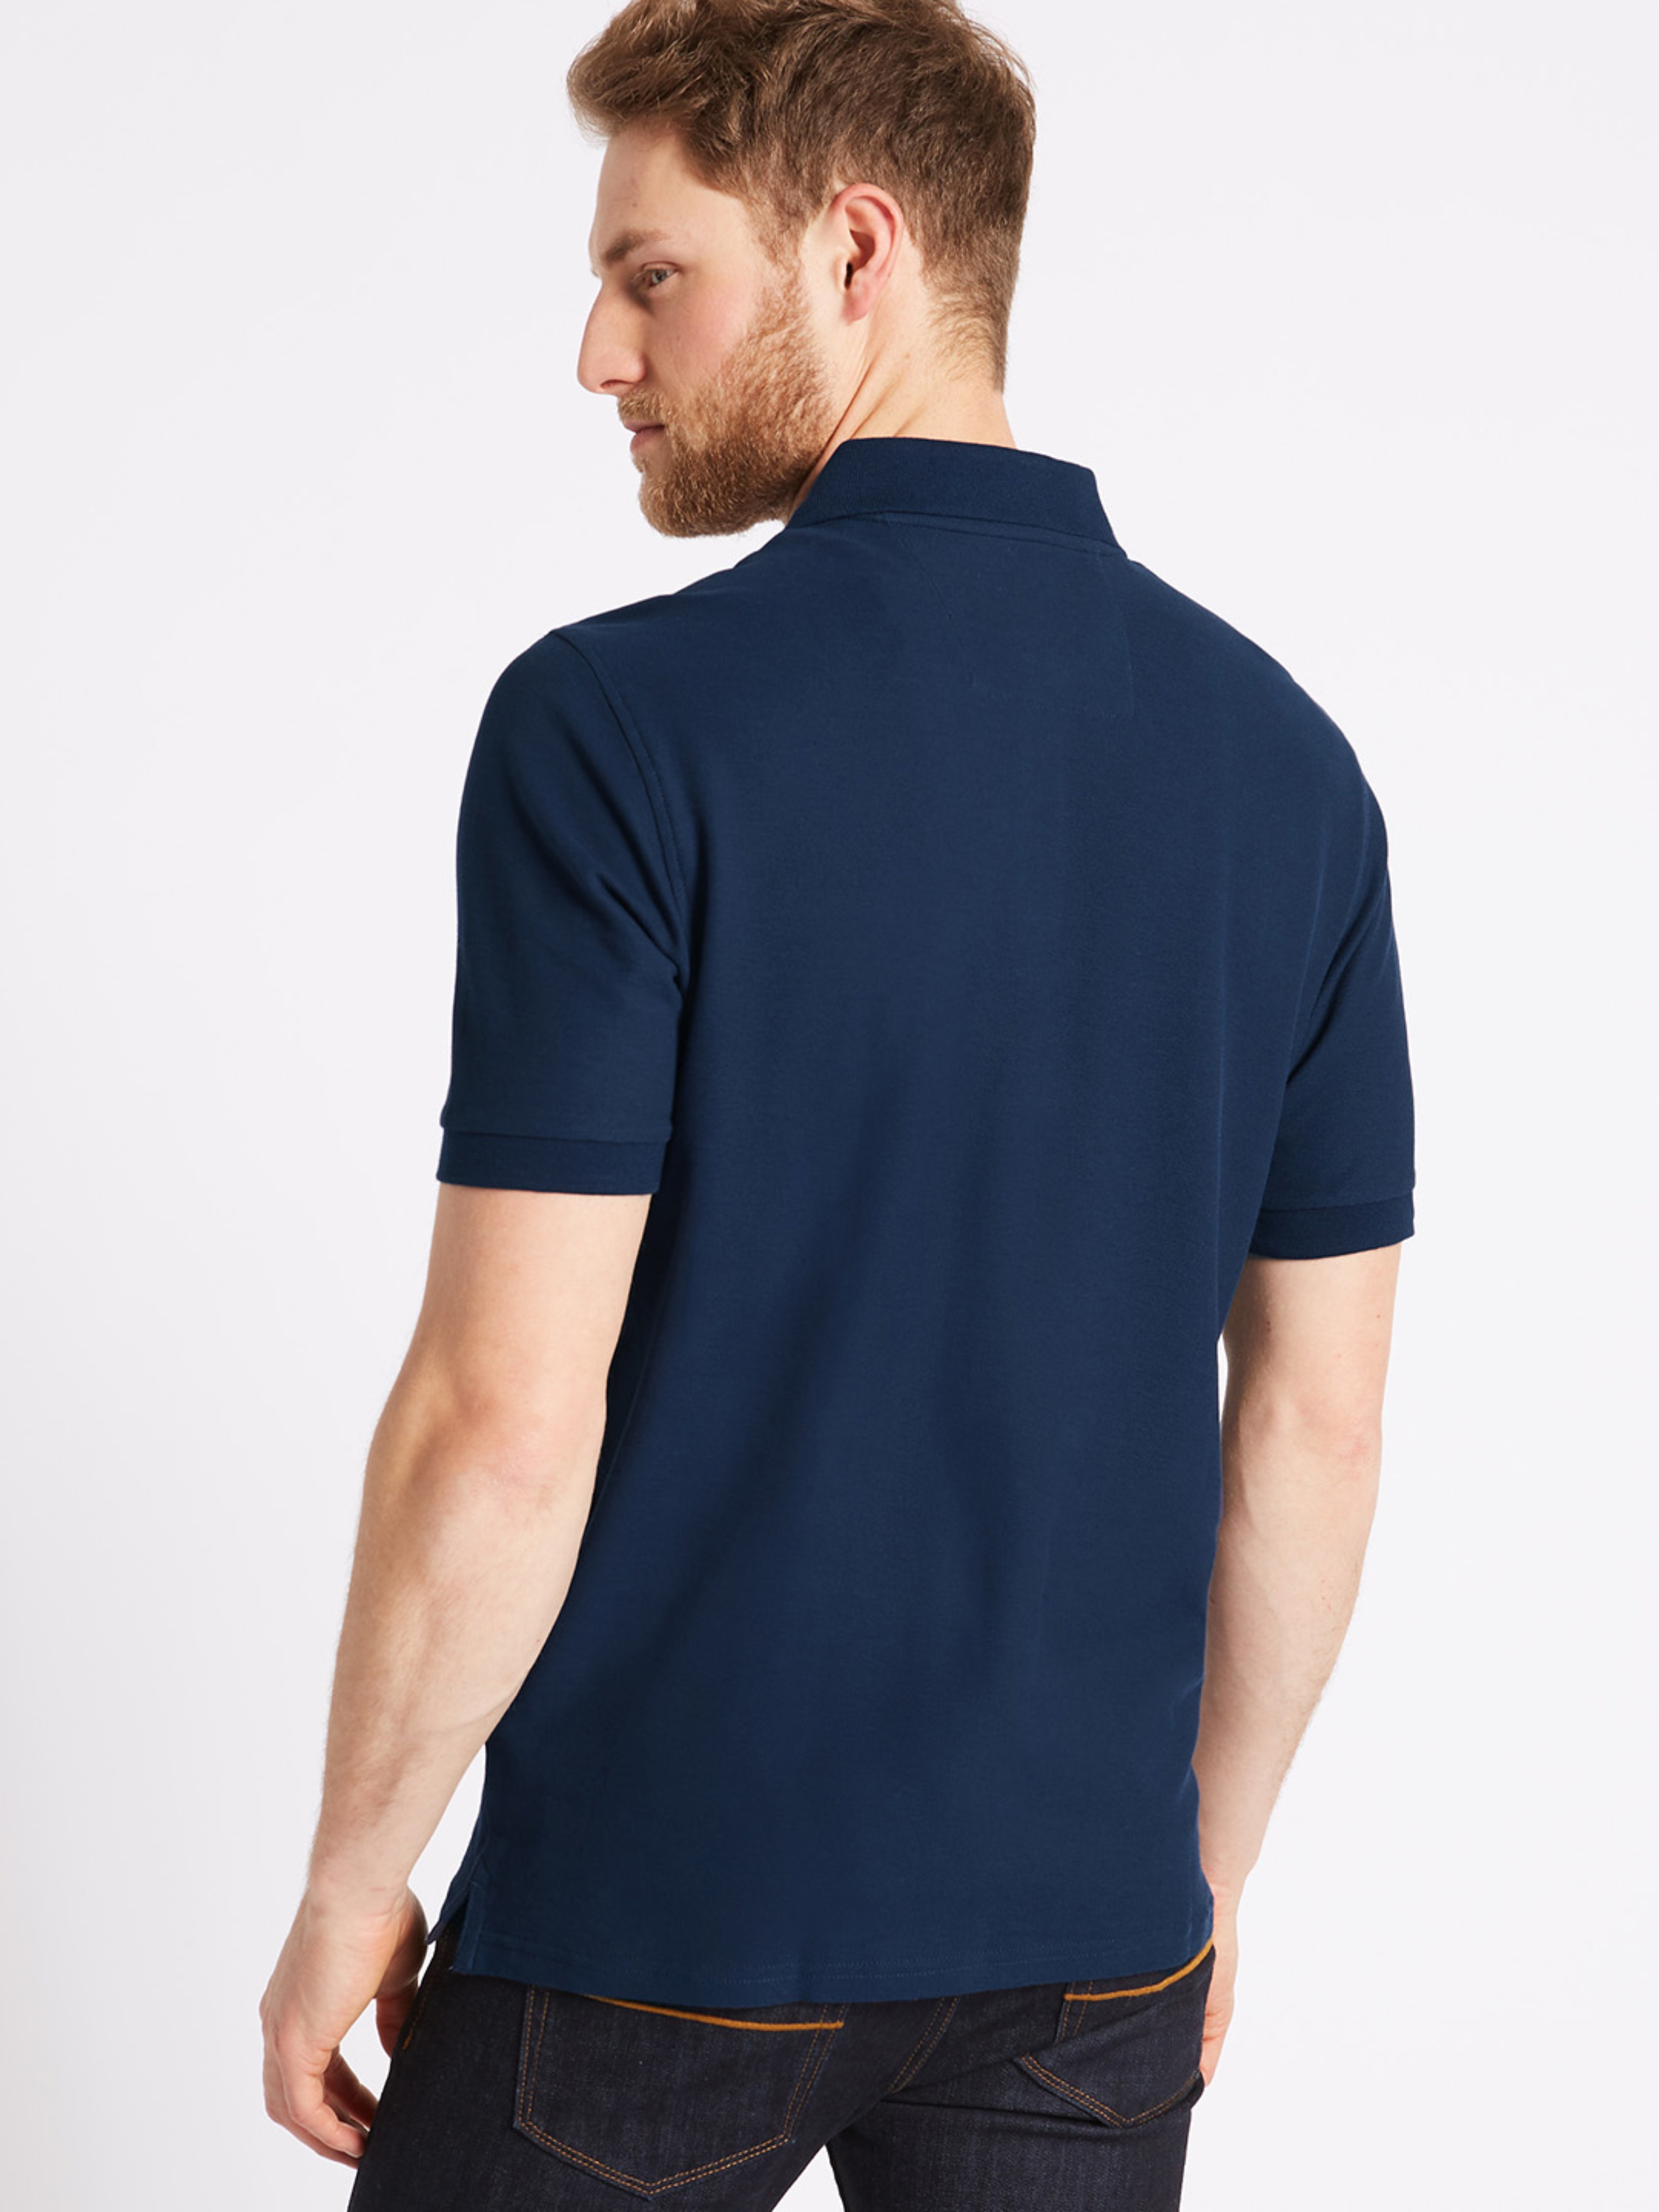 Buy PLAIN POLO NECK BLUE T-SHIRT IN COTTON MATTY . Online @ ₹298 from ...